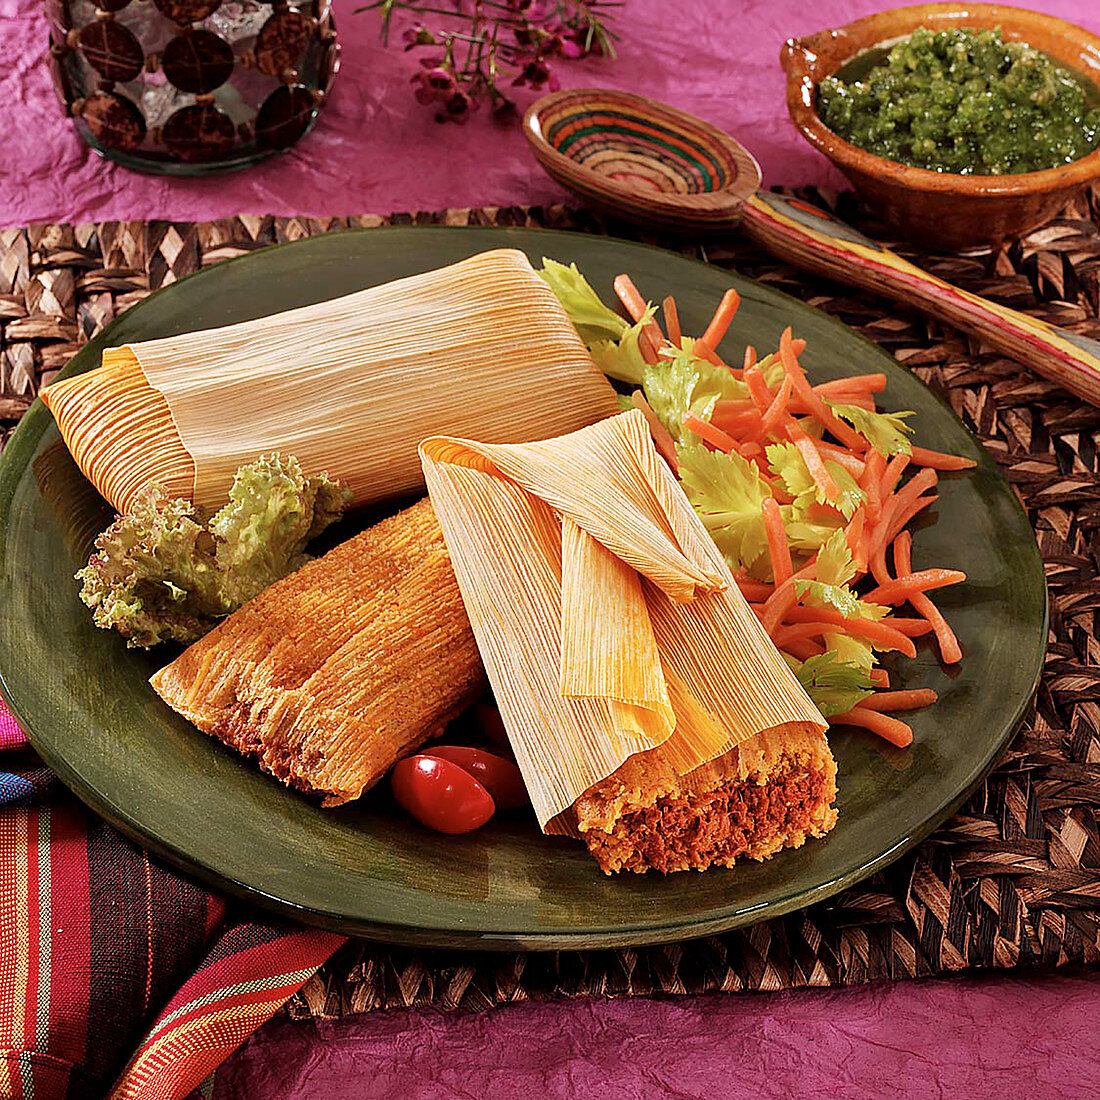 Ground Pork Tamales in corn husk wrappers